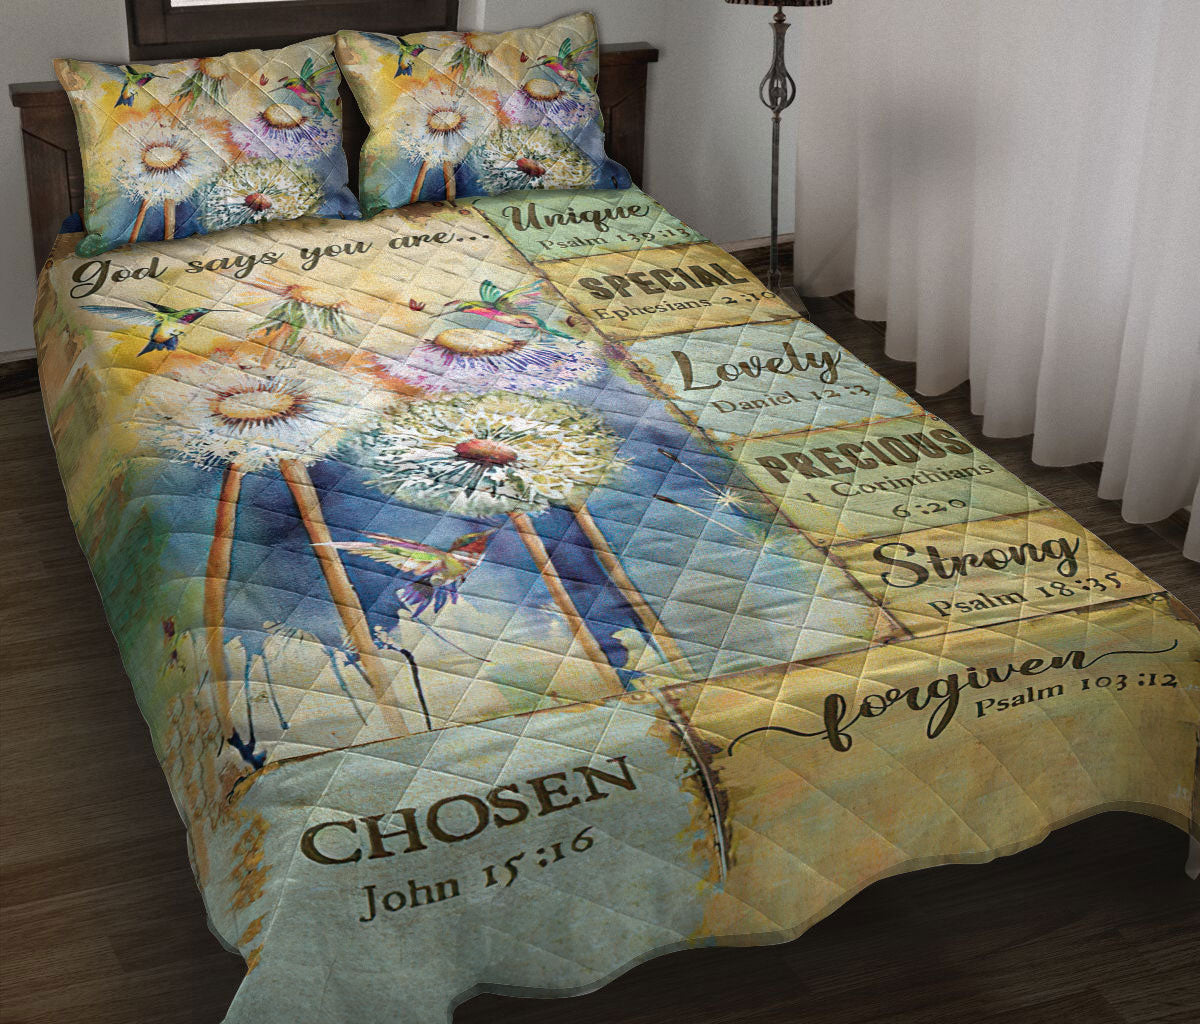 Ohaprints-Quilt-Bed-Set-Pillowcase-Hummingbird-Dandelion-Flower-God-Say-You-Are-Unique-Vintage-Yellow-Blanket-Bedspread-Bedding-2640-Throw (55'' x 60'')